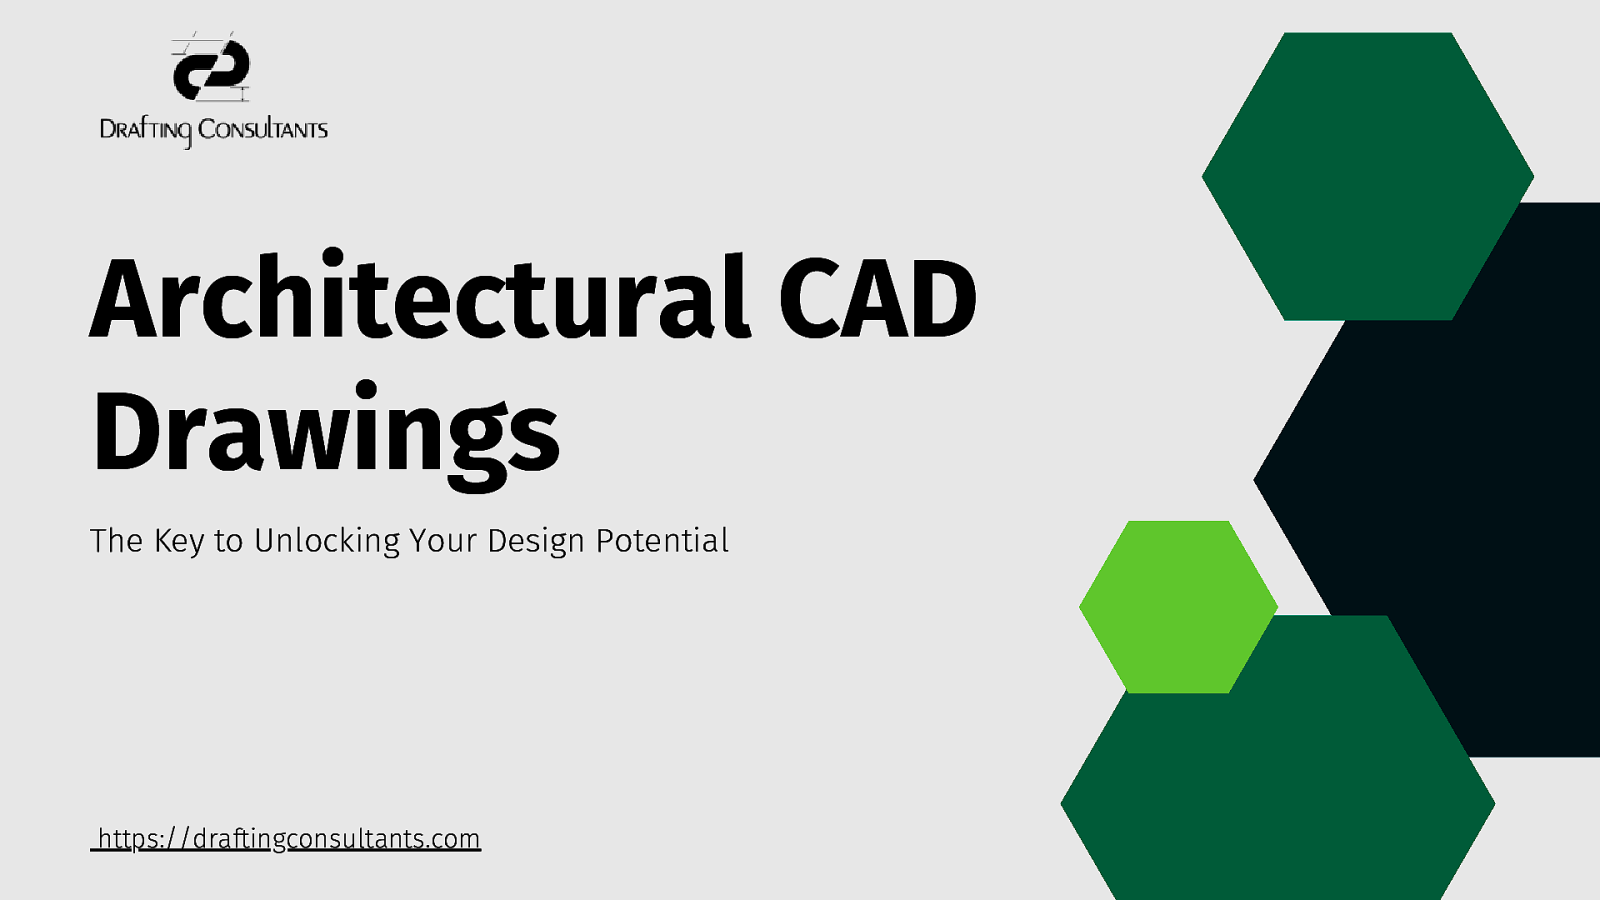 Architectural CAD Drawings: The Key to Unlocking Your Design Potential by Drafting Consultants